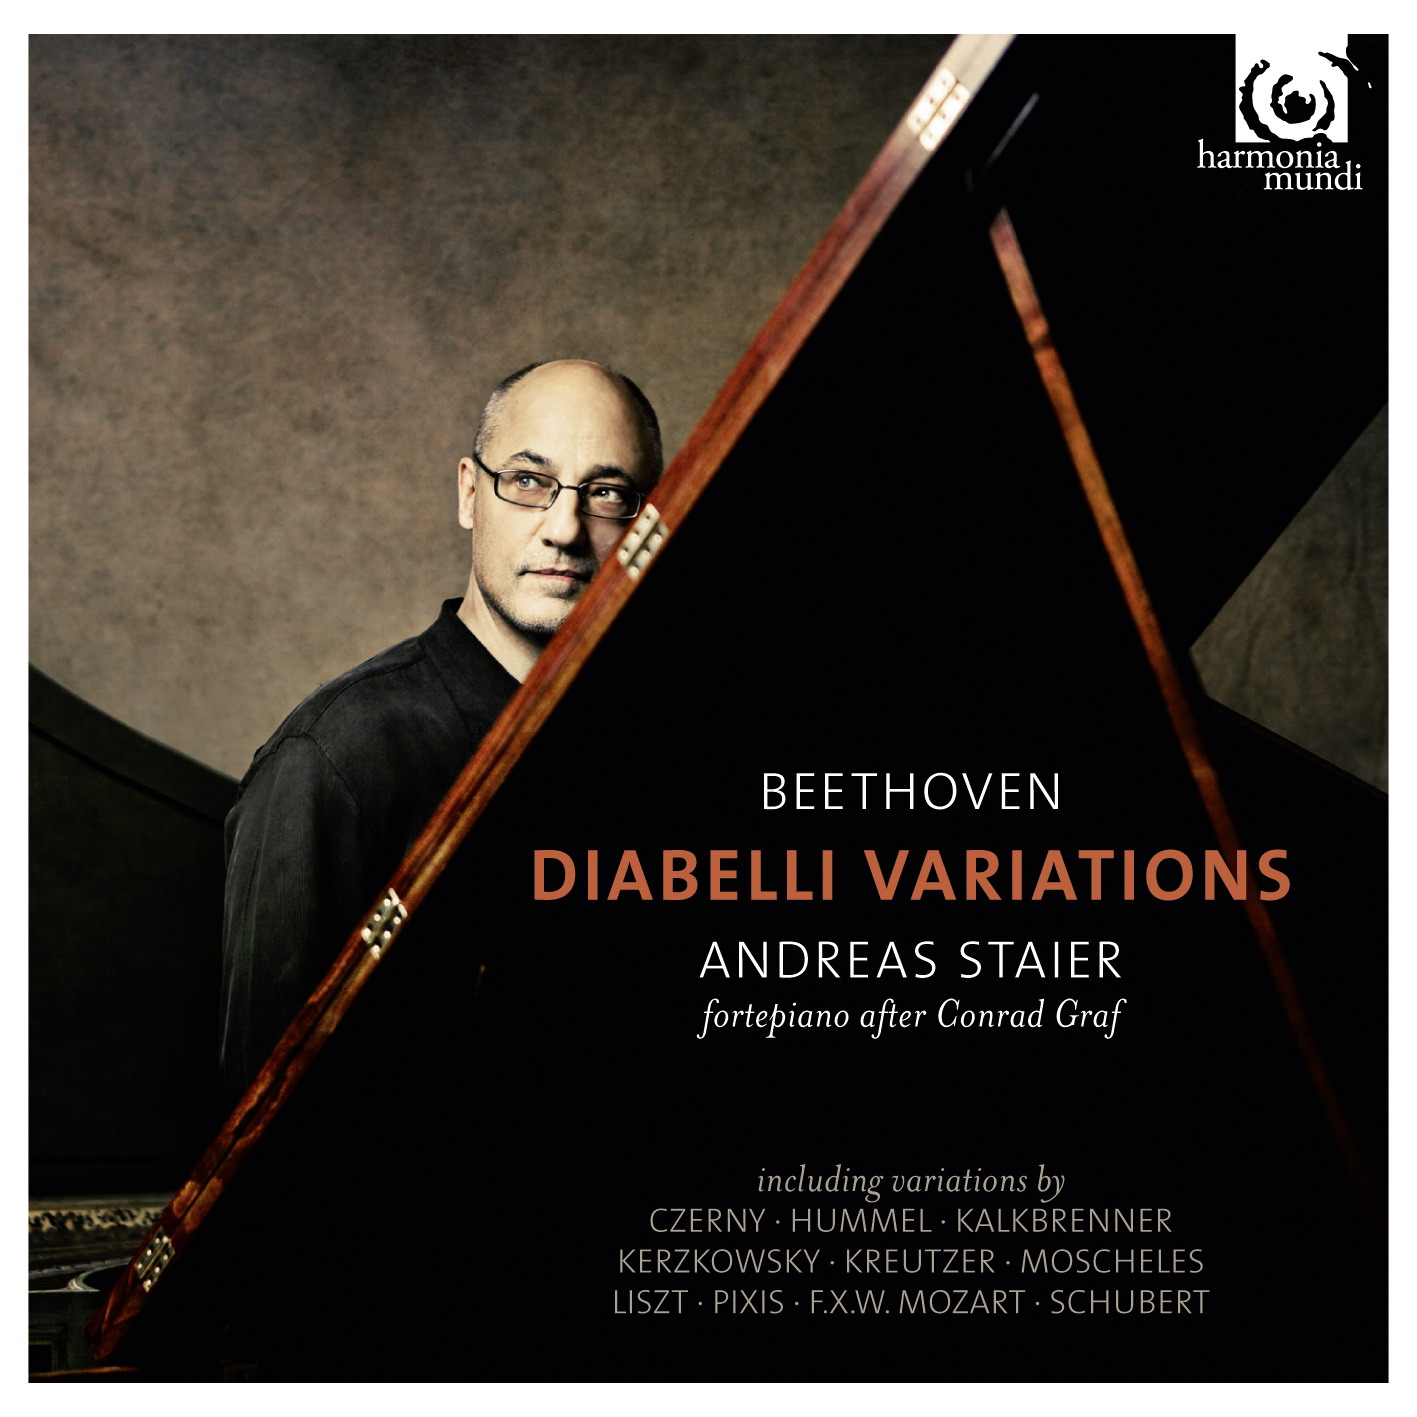 Andreas Staier - Beethoven: Diabelli Variations (2012) [FLAC 24bit/44,1kHz]